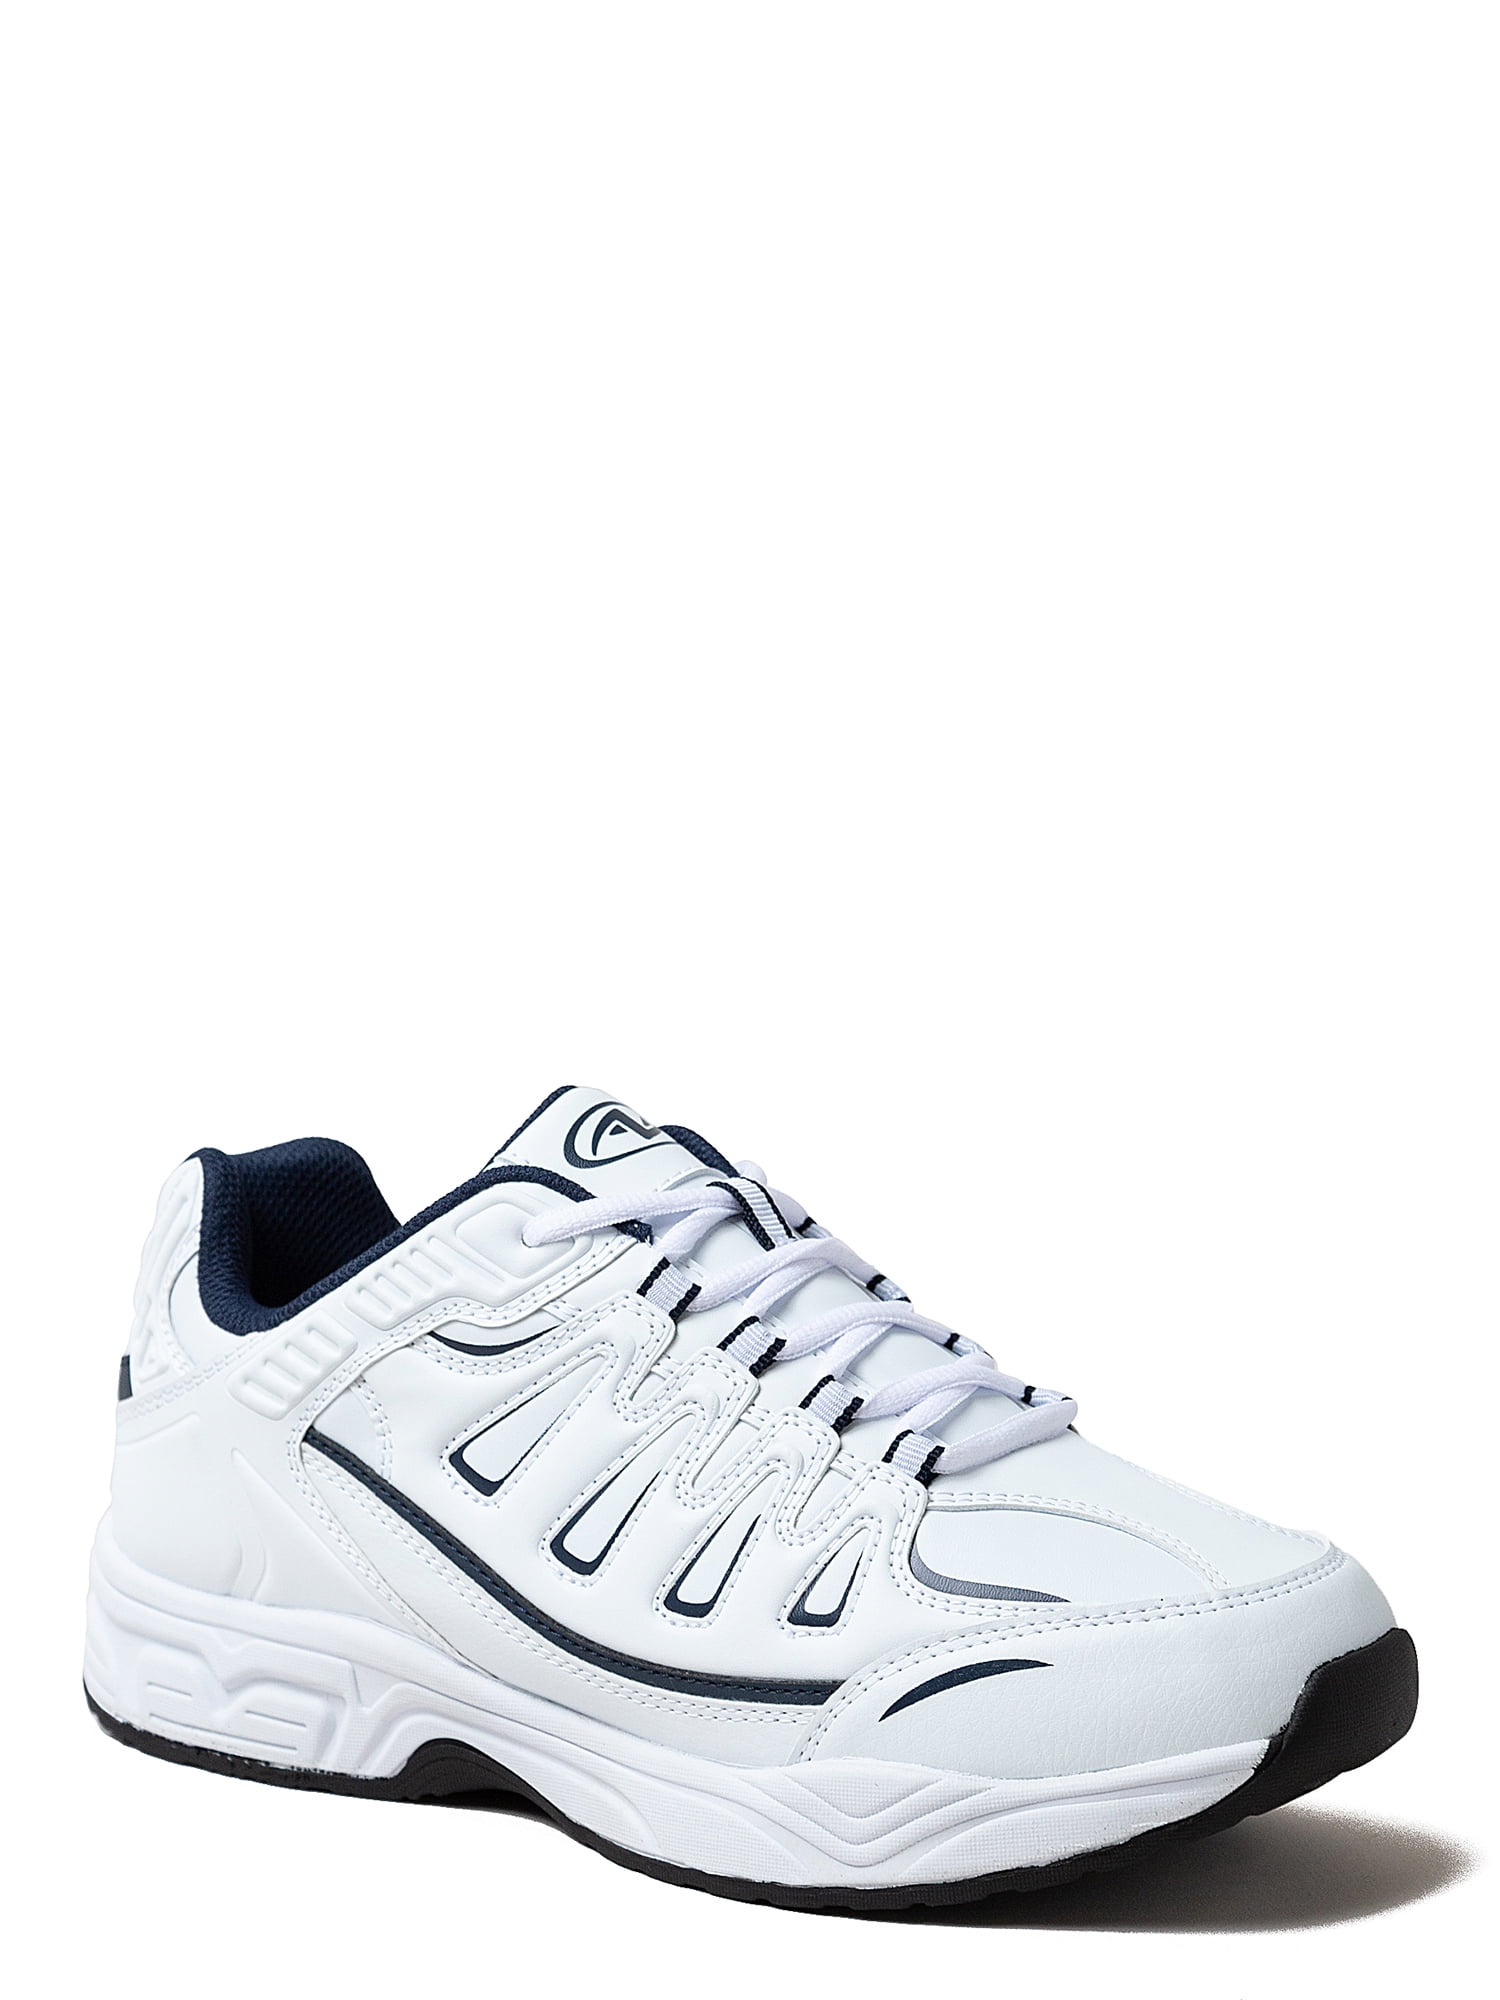 Athletic Works Shoes : Apparel 